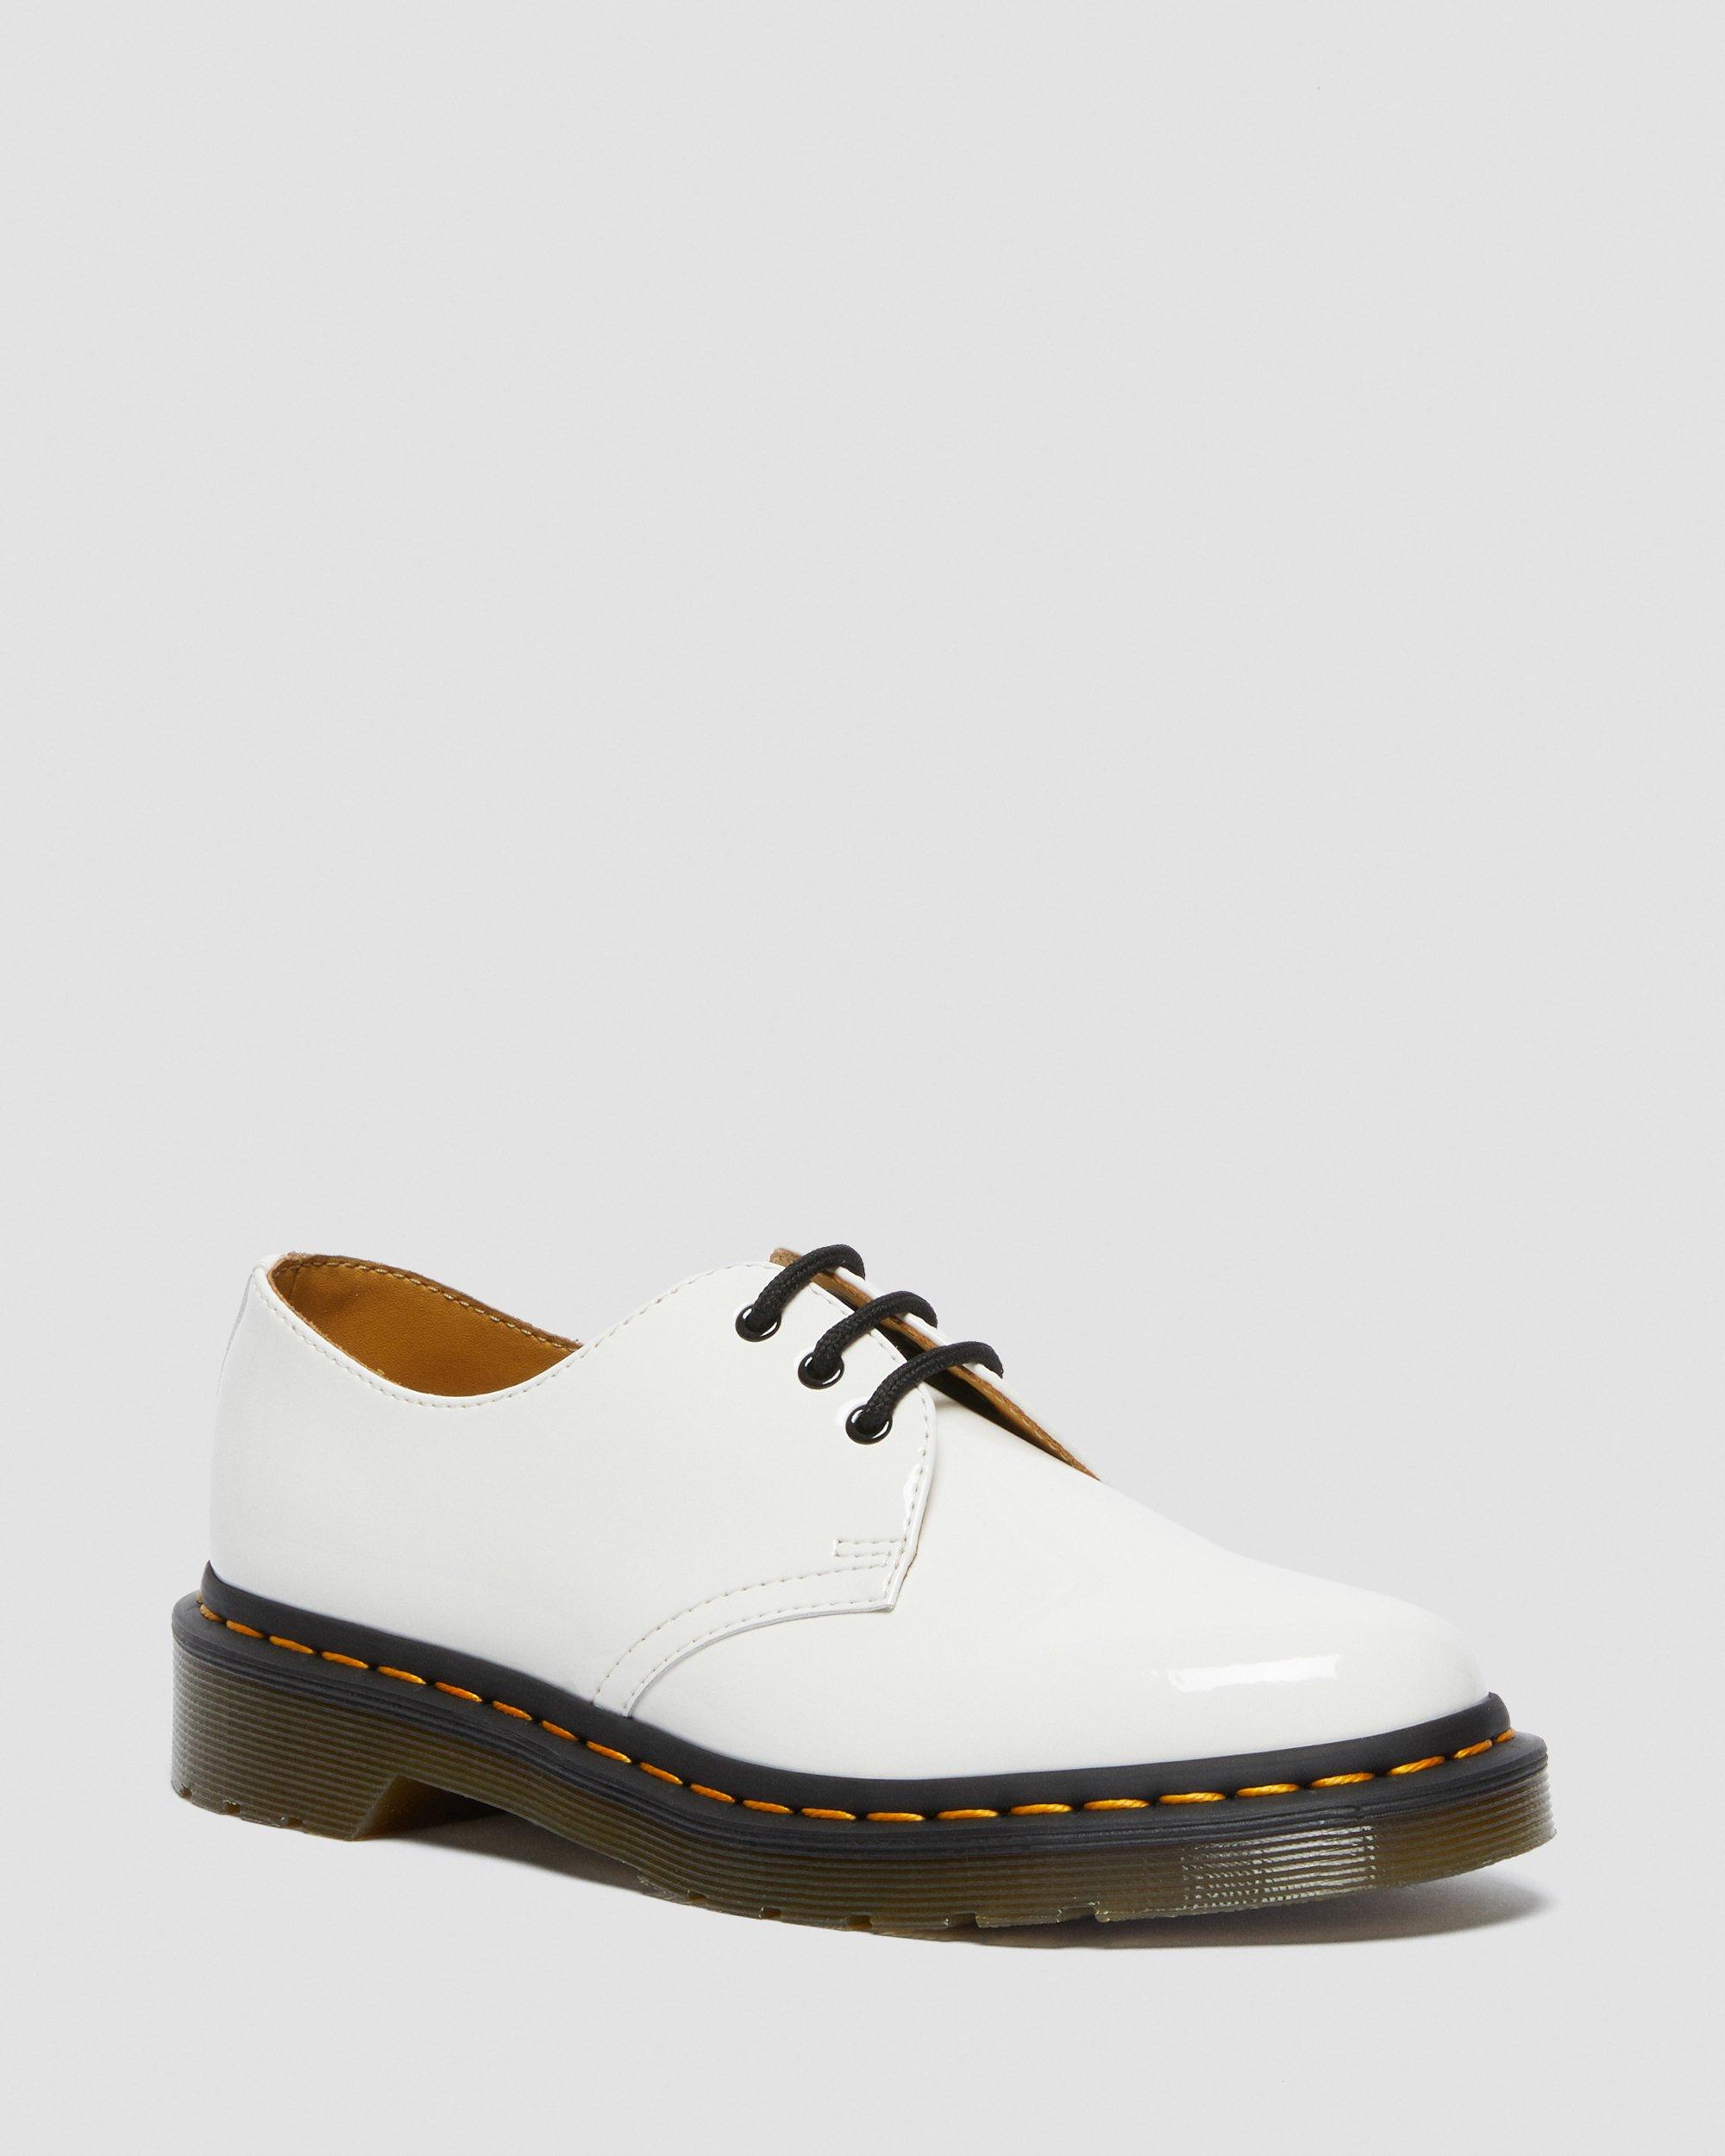 DR MARTENS 1461 Bex Patent Leather Oxford Shoes